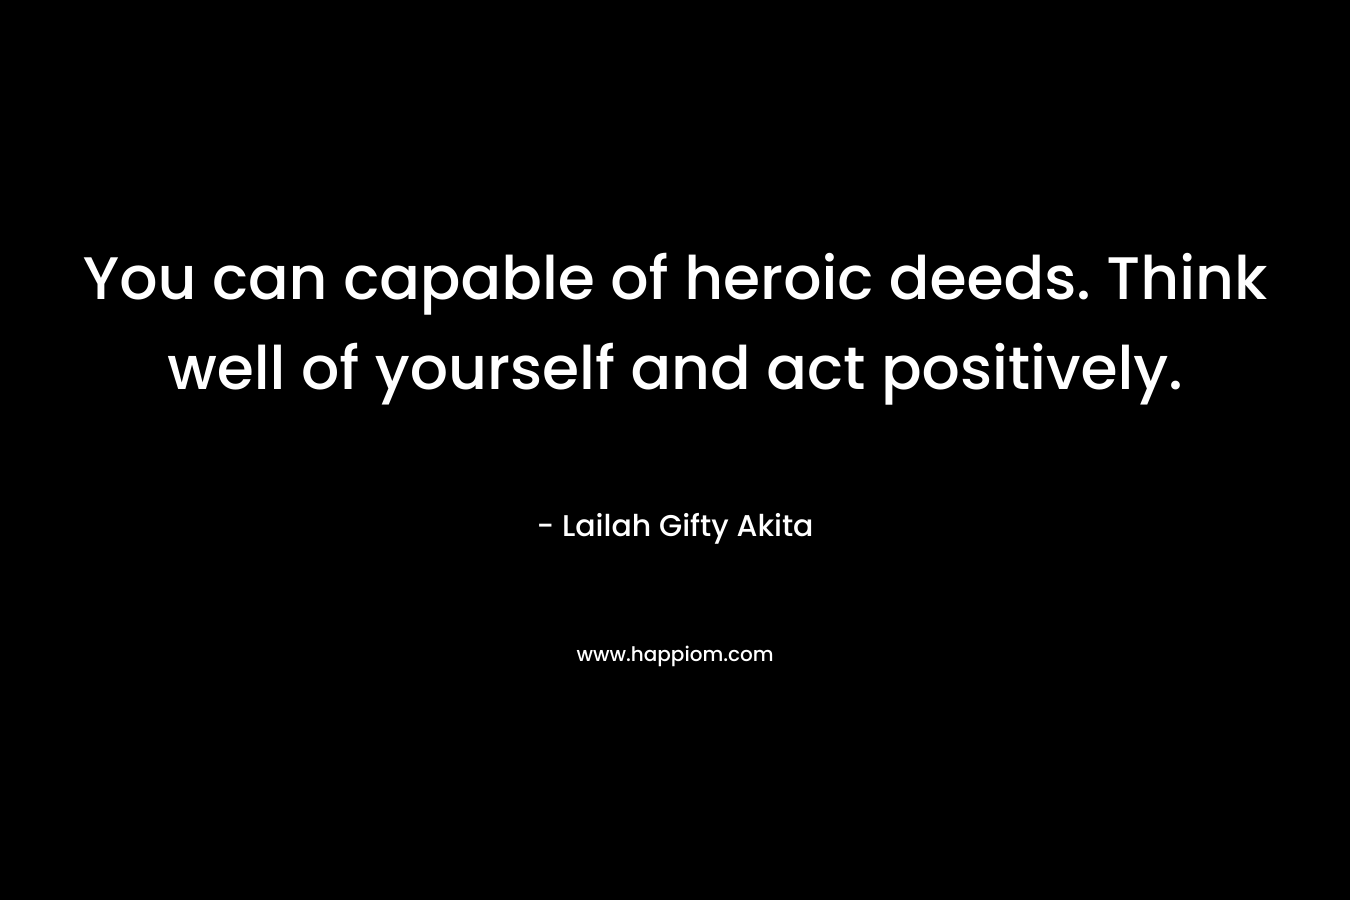 You can capable of heroic deeds. Think well of yourself and act positively.